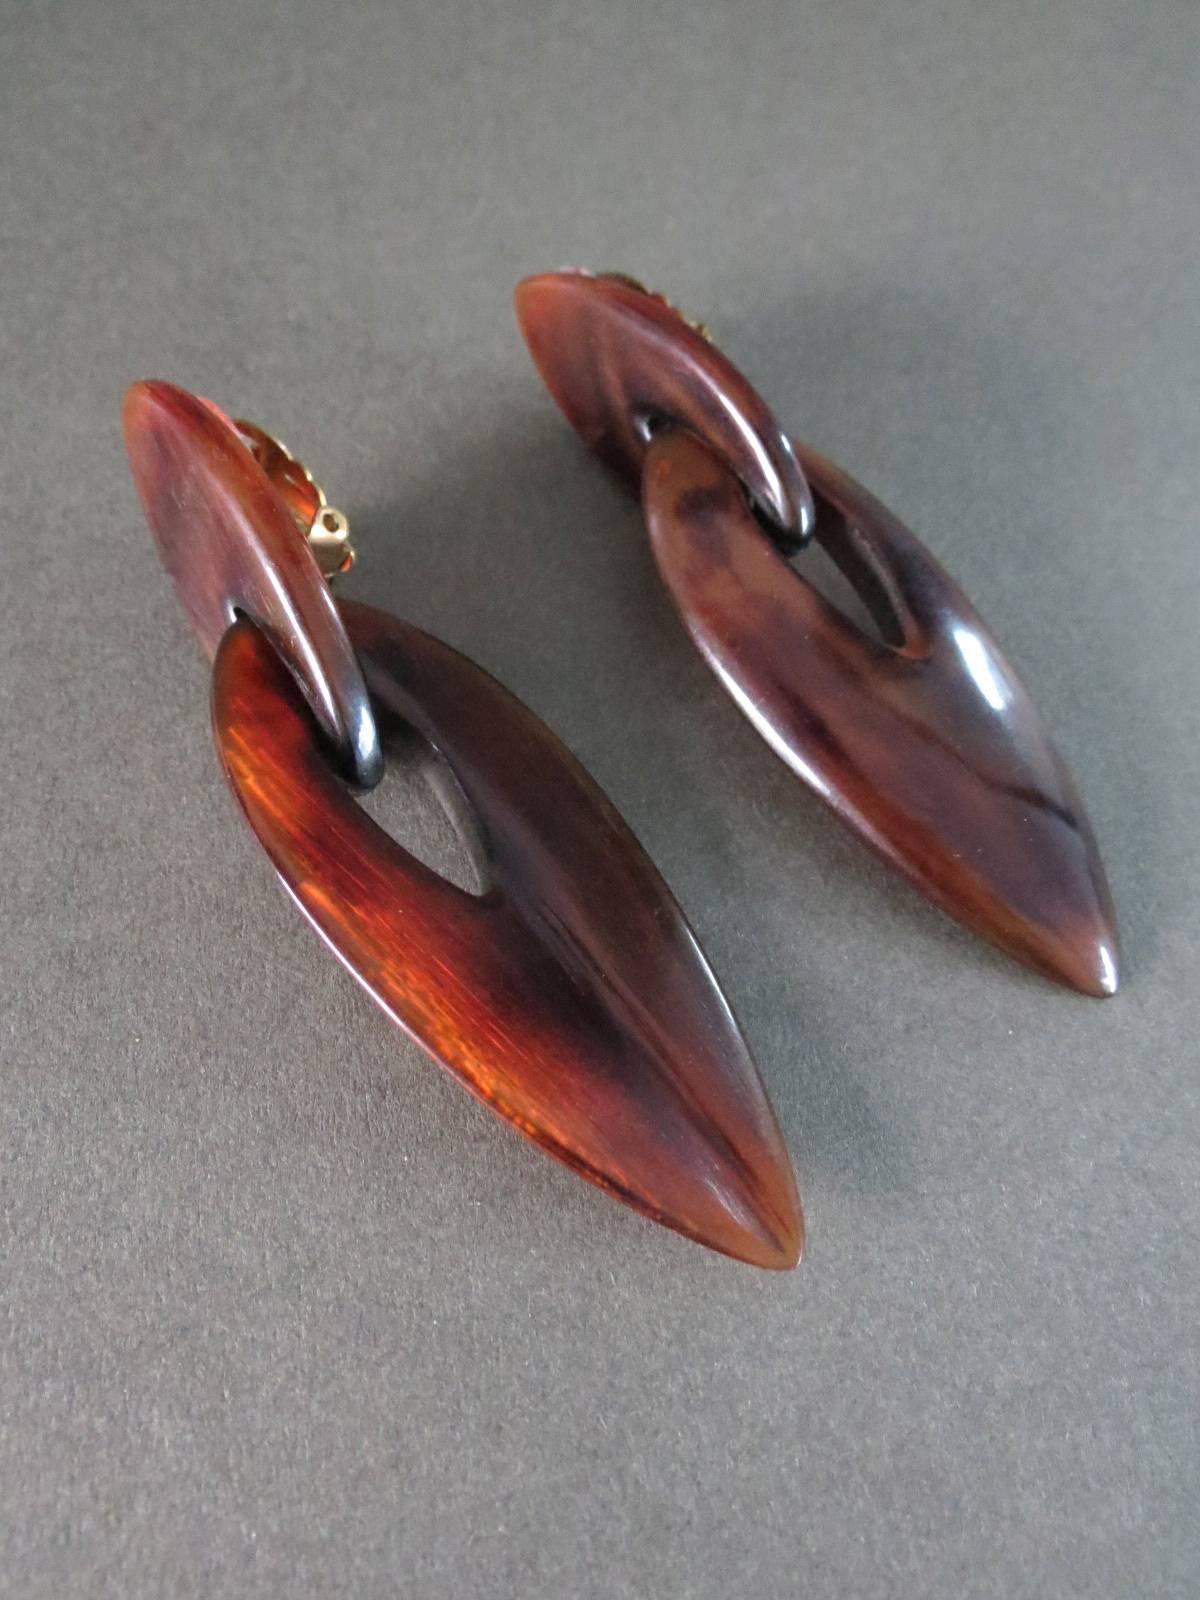 This Monies vintage set of earrings would be lovely addition to your collection.
Clip earrings are made of horn.
Items Specifics
Length: 10cm (approx 4.00